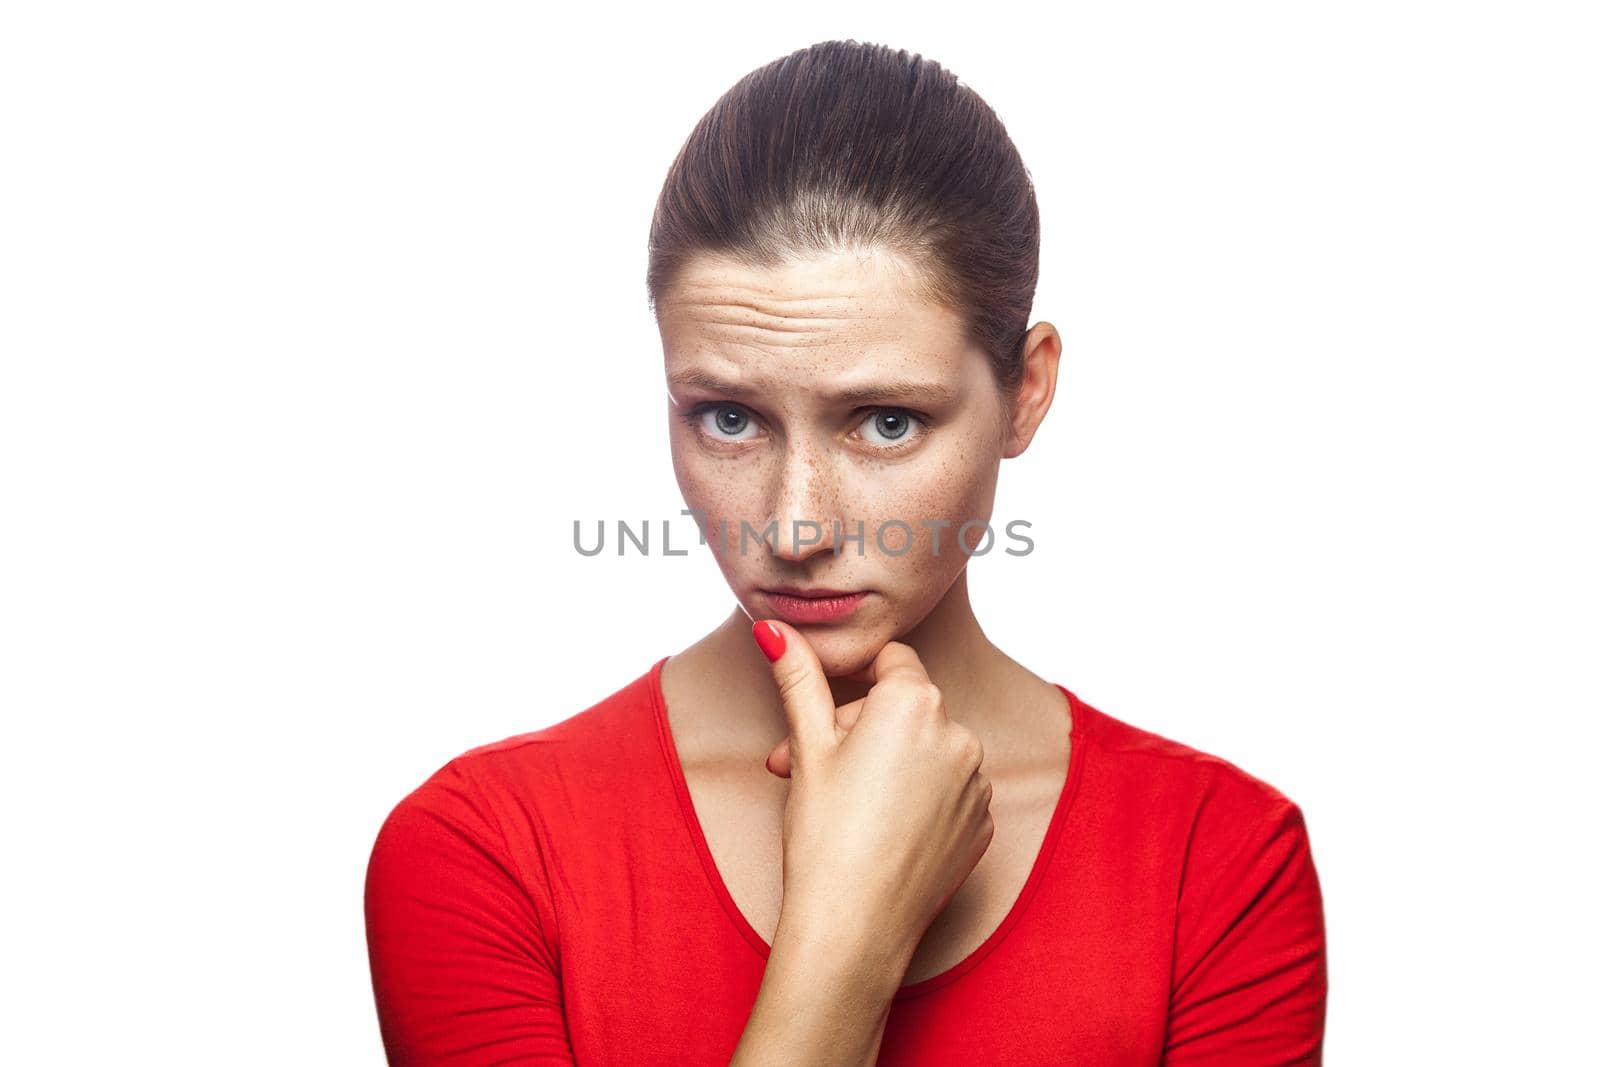 Portrait of thoughtful serious woman in red t-shirt with freckles, studio shot, looking at camera. isolated on white background.